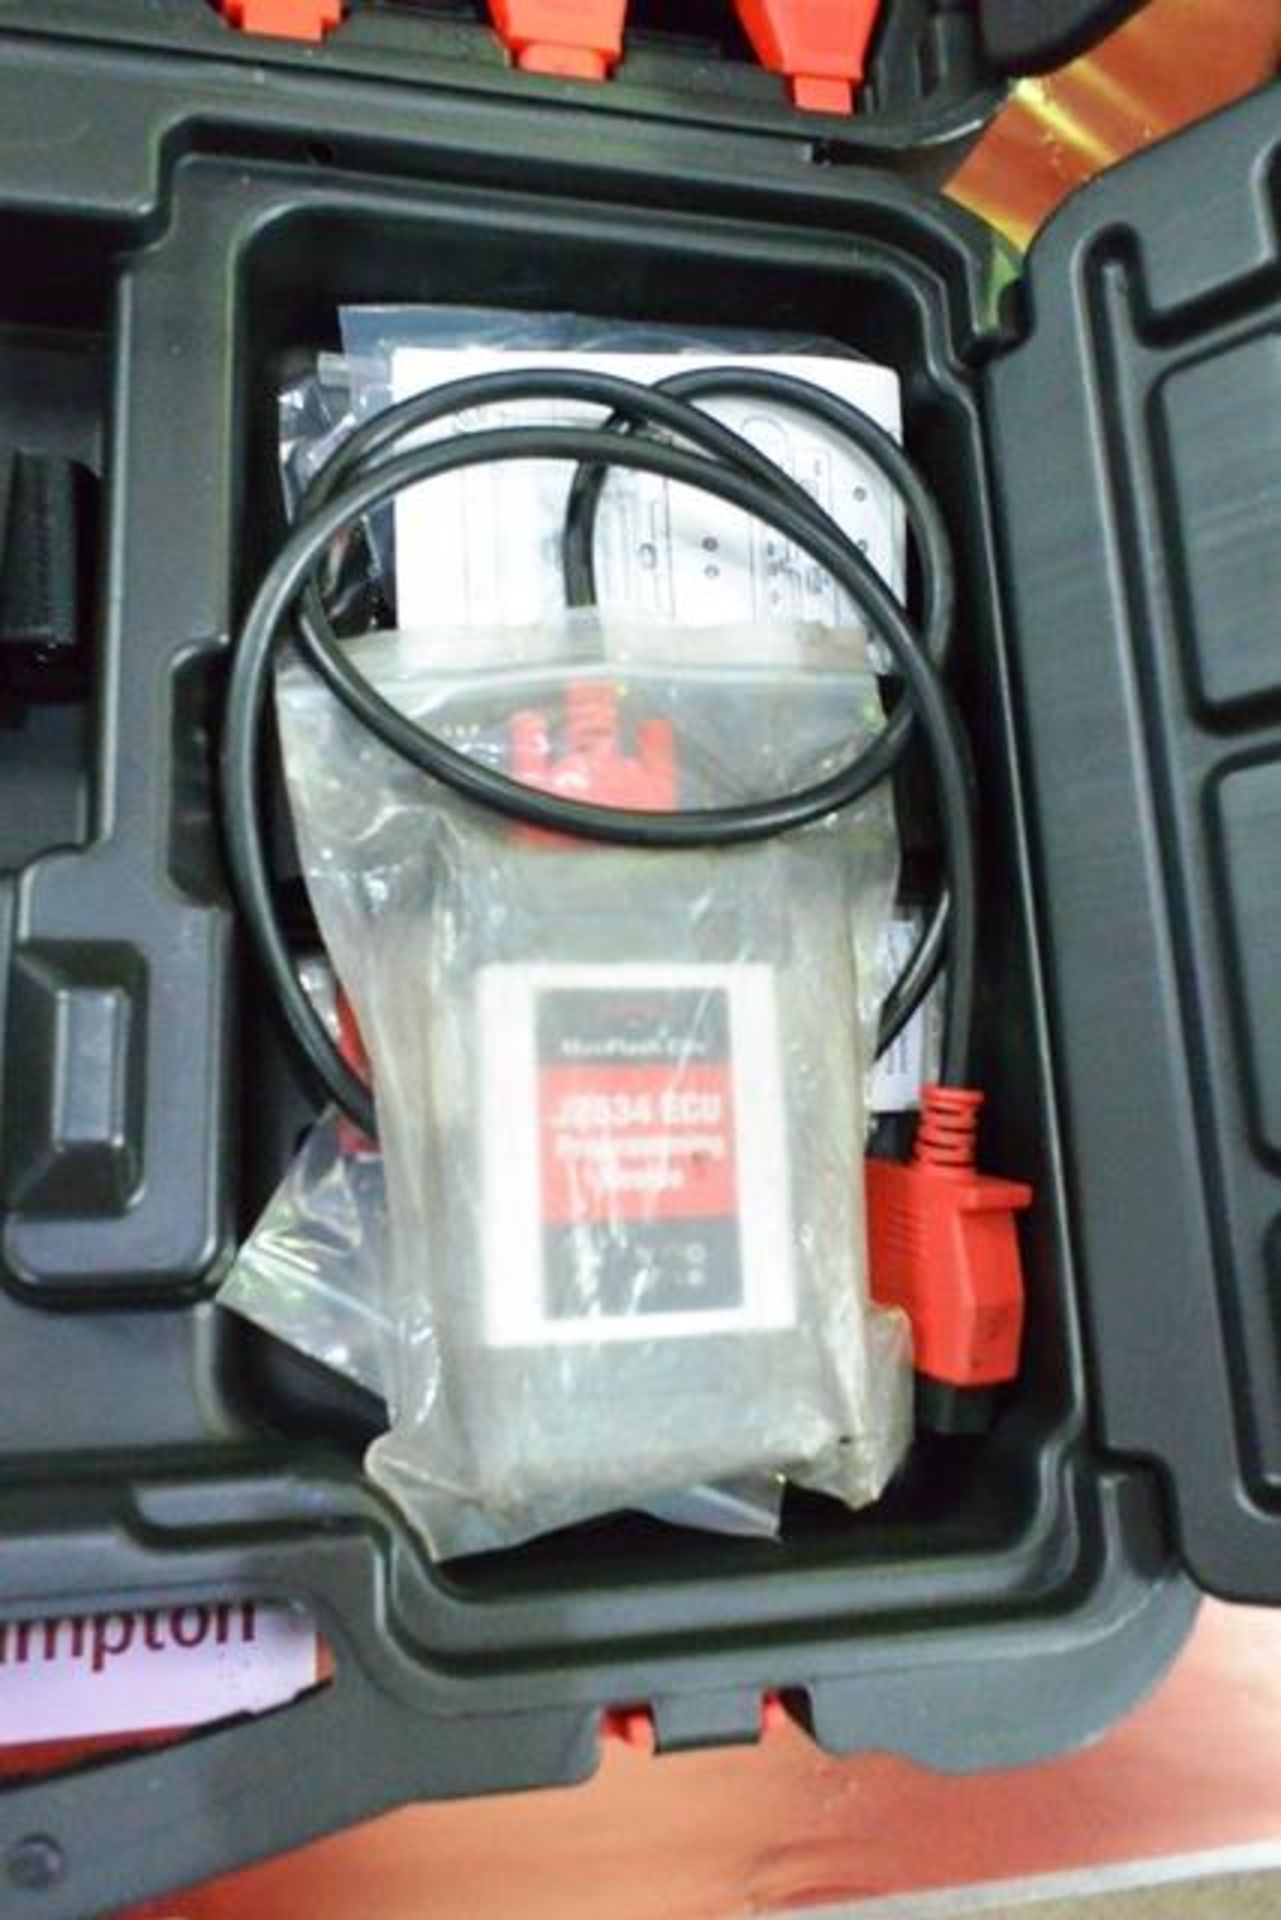 Autel Maxi Sys MS9085 Pro diagnostic touch screen tablet, associated connectors and carry case - Image 3 of 6